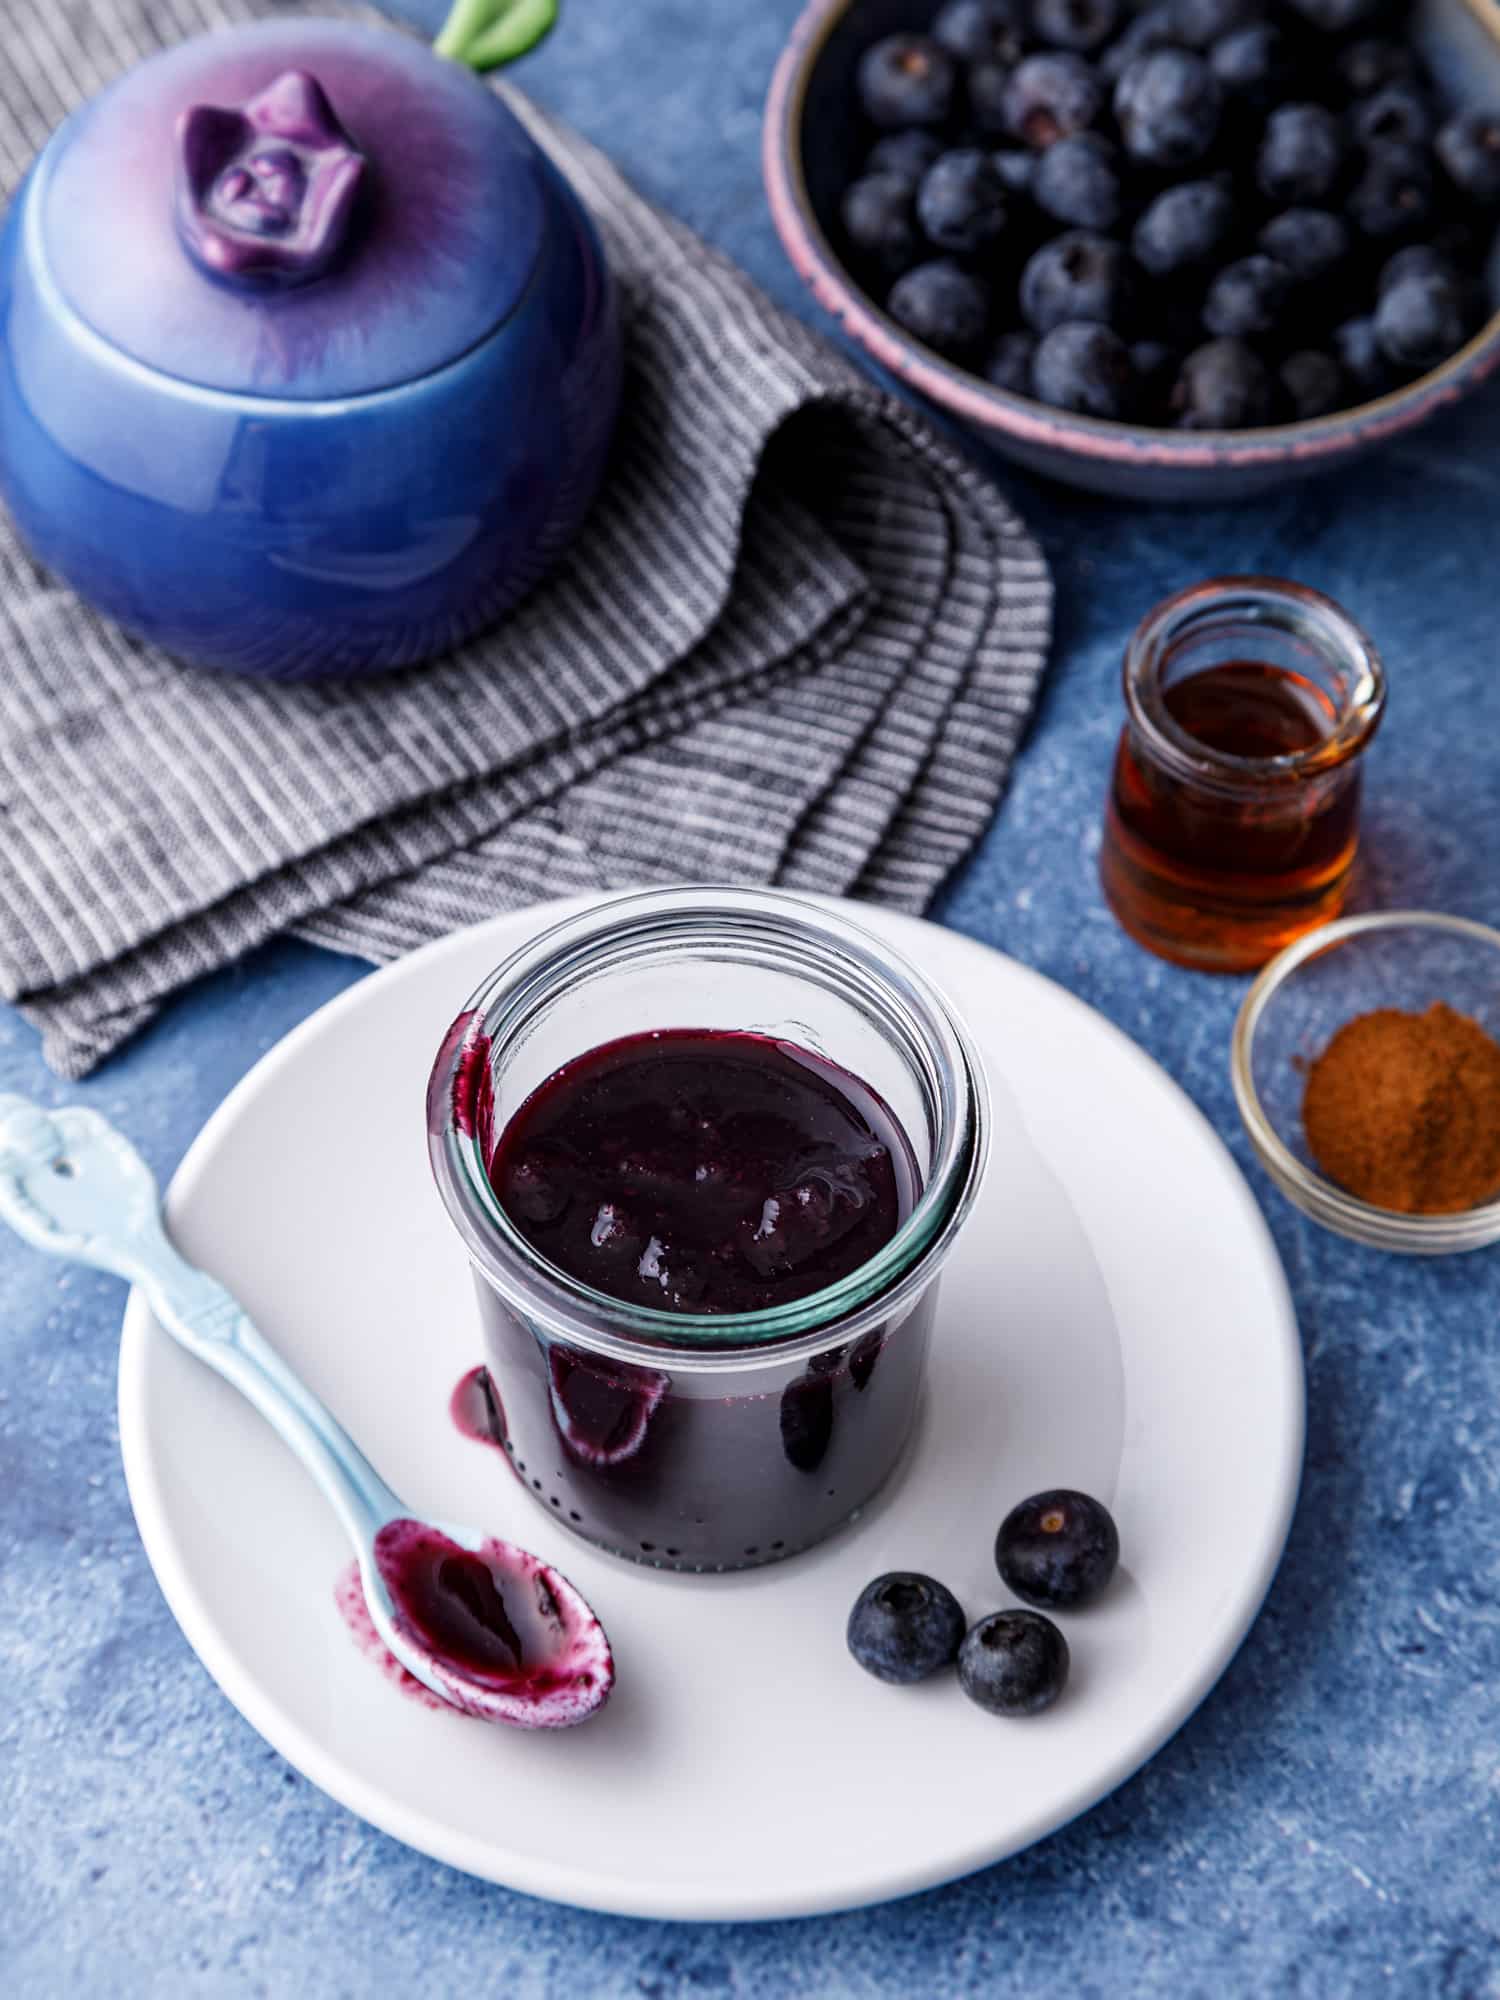 jar of homemade blueberry cinnamon sauce on a plate next to a bowl of fresh blueberries a blue serving pot